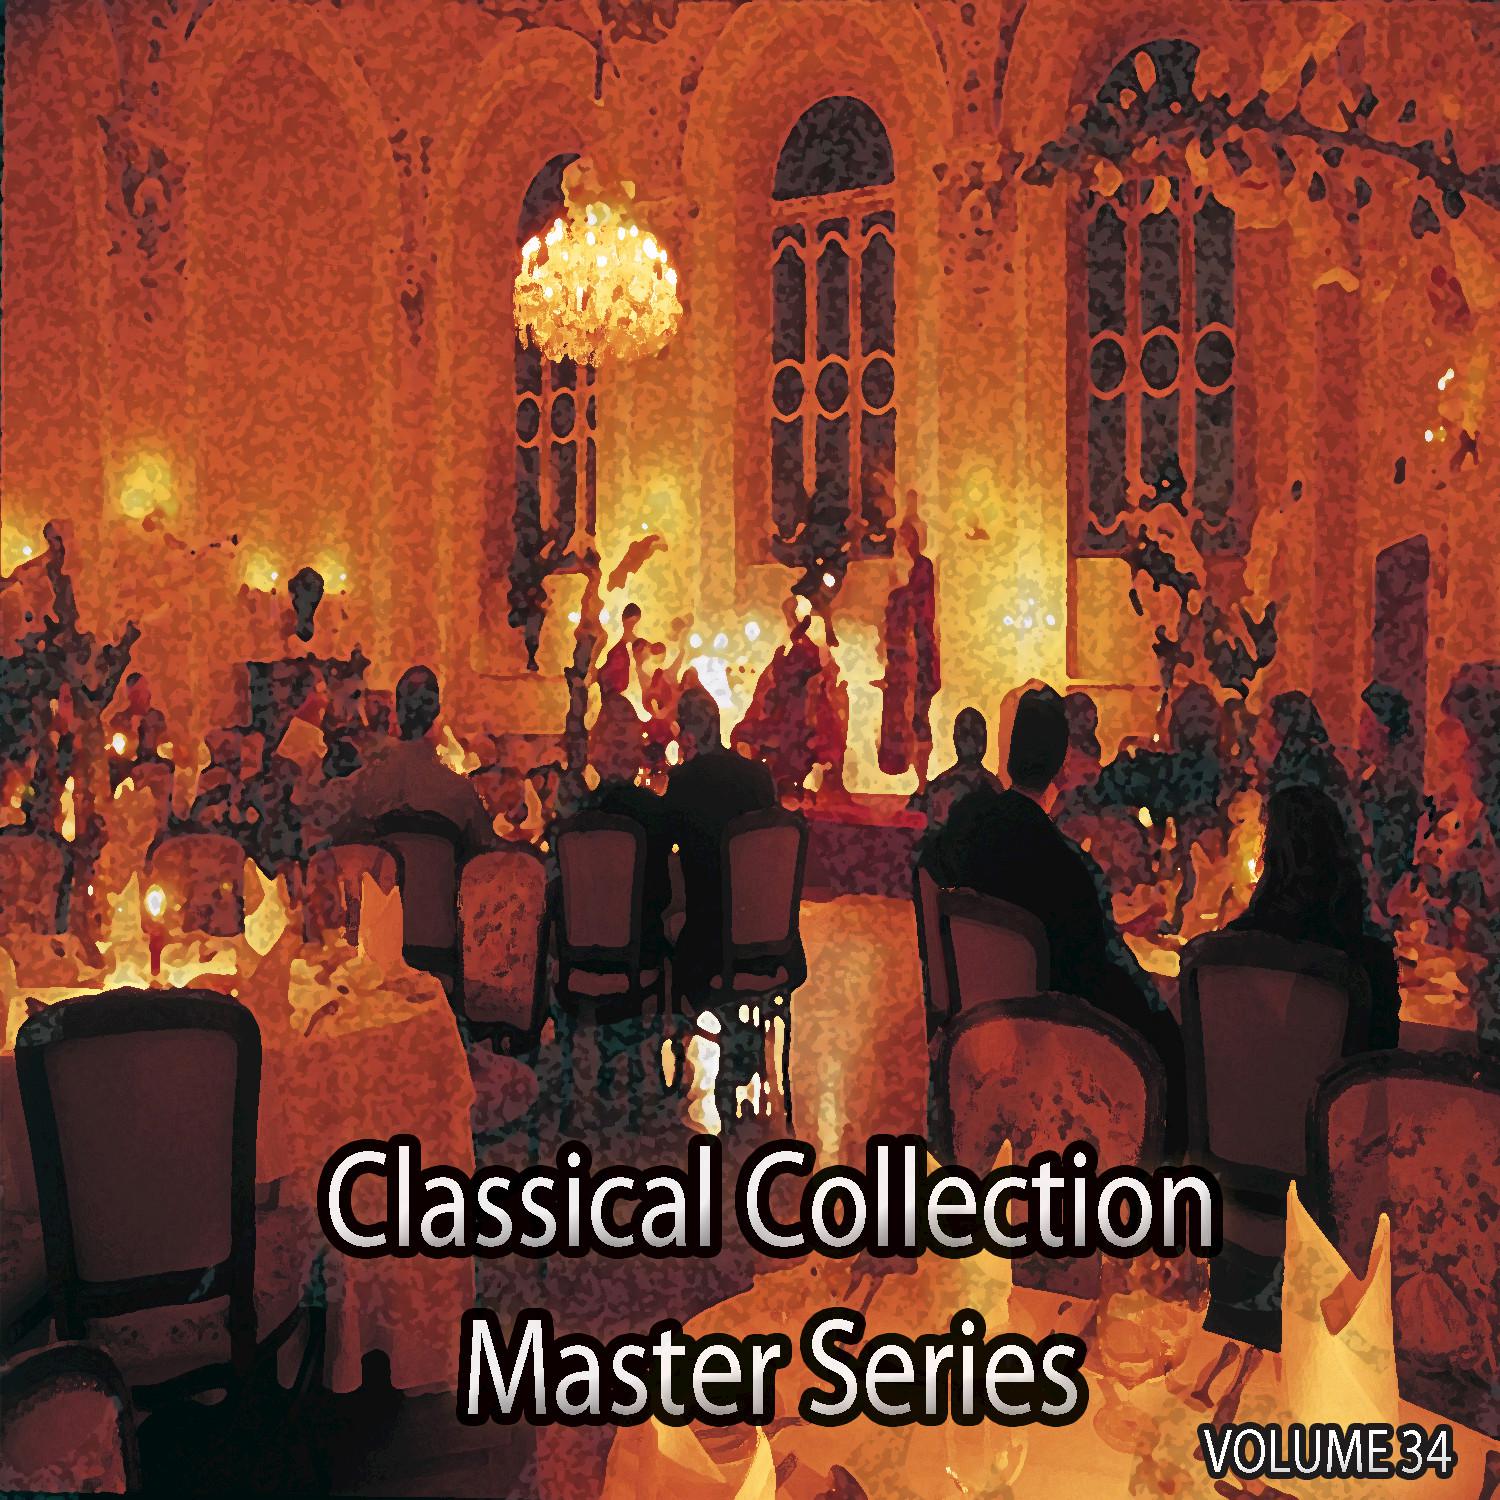 Concerto for Violin and Orchestra No. 2 in G Minor, Op. 63: II. Andante assai, Pt. 2